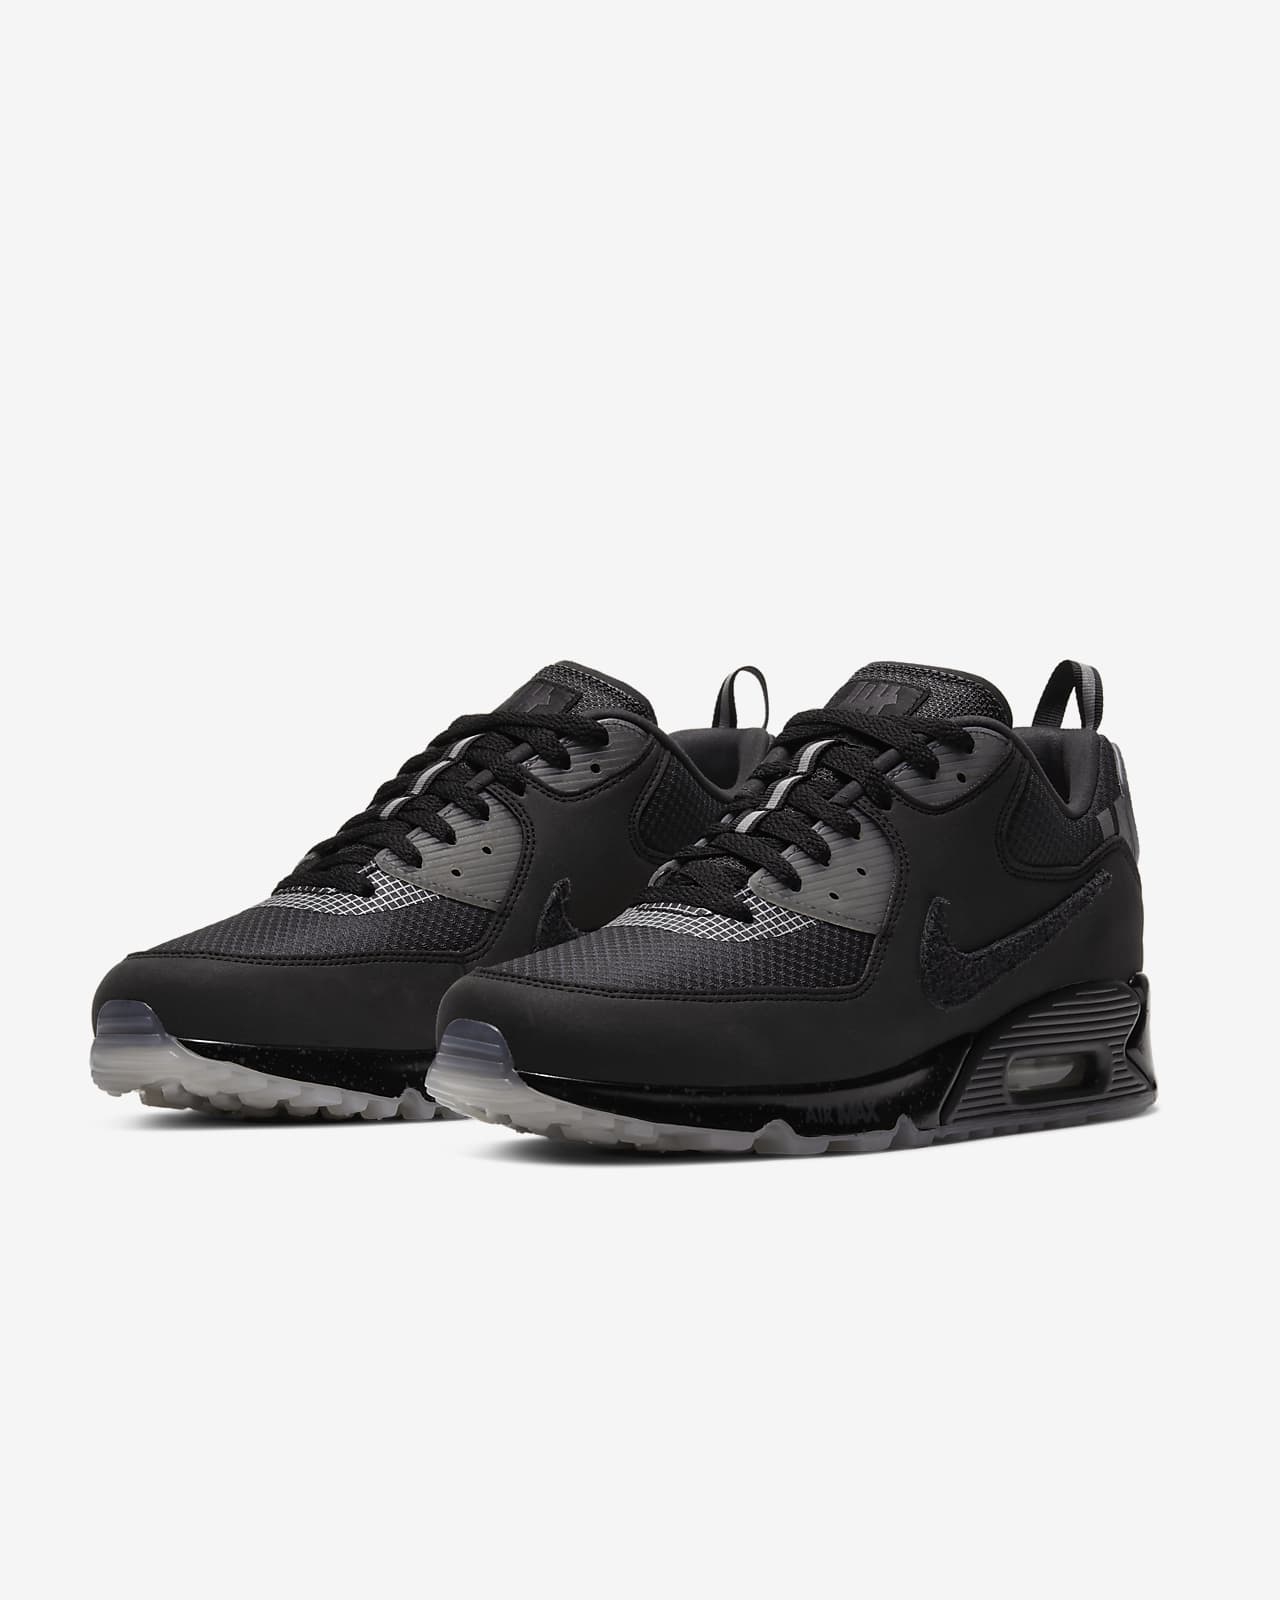 Nike x UNDEFEATED Air Max 90 Shoes. Nike ID